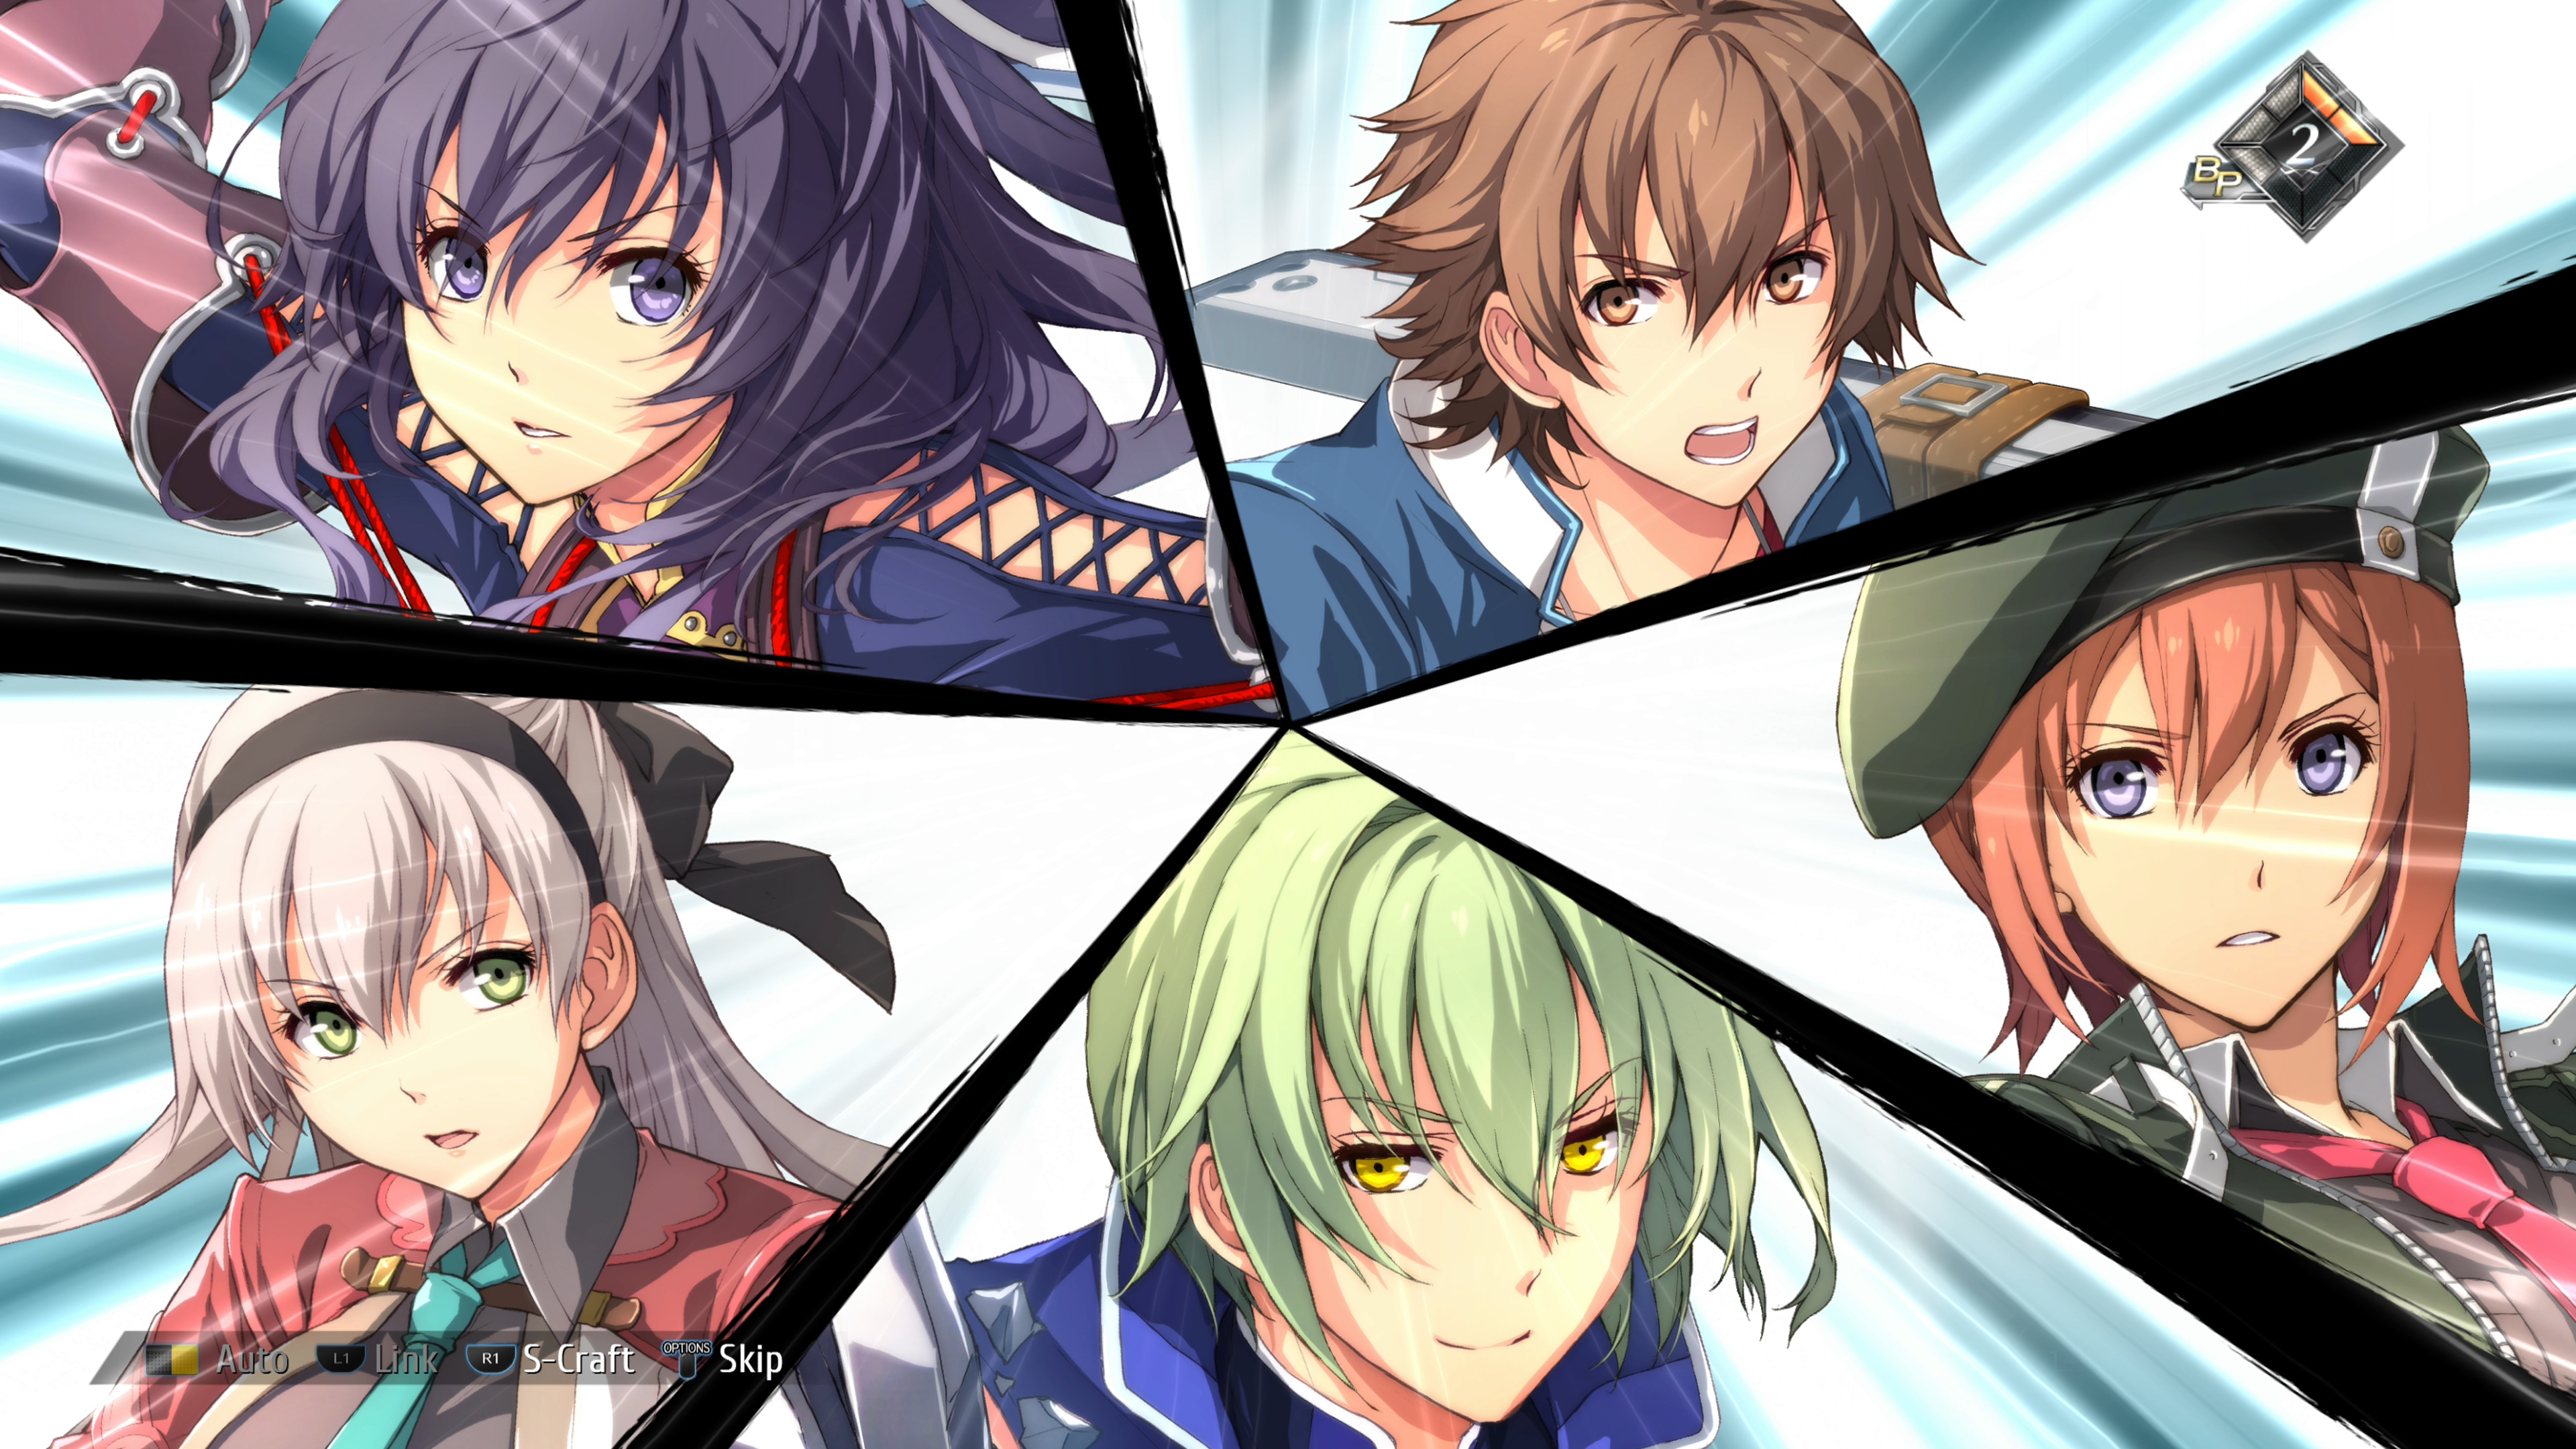 Trails into Reverie review: Five character portraits featuring the members of Crossbell's SSS are shown in breakout style.